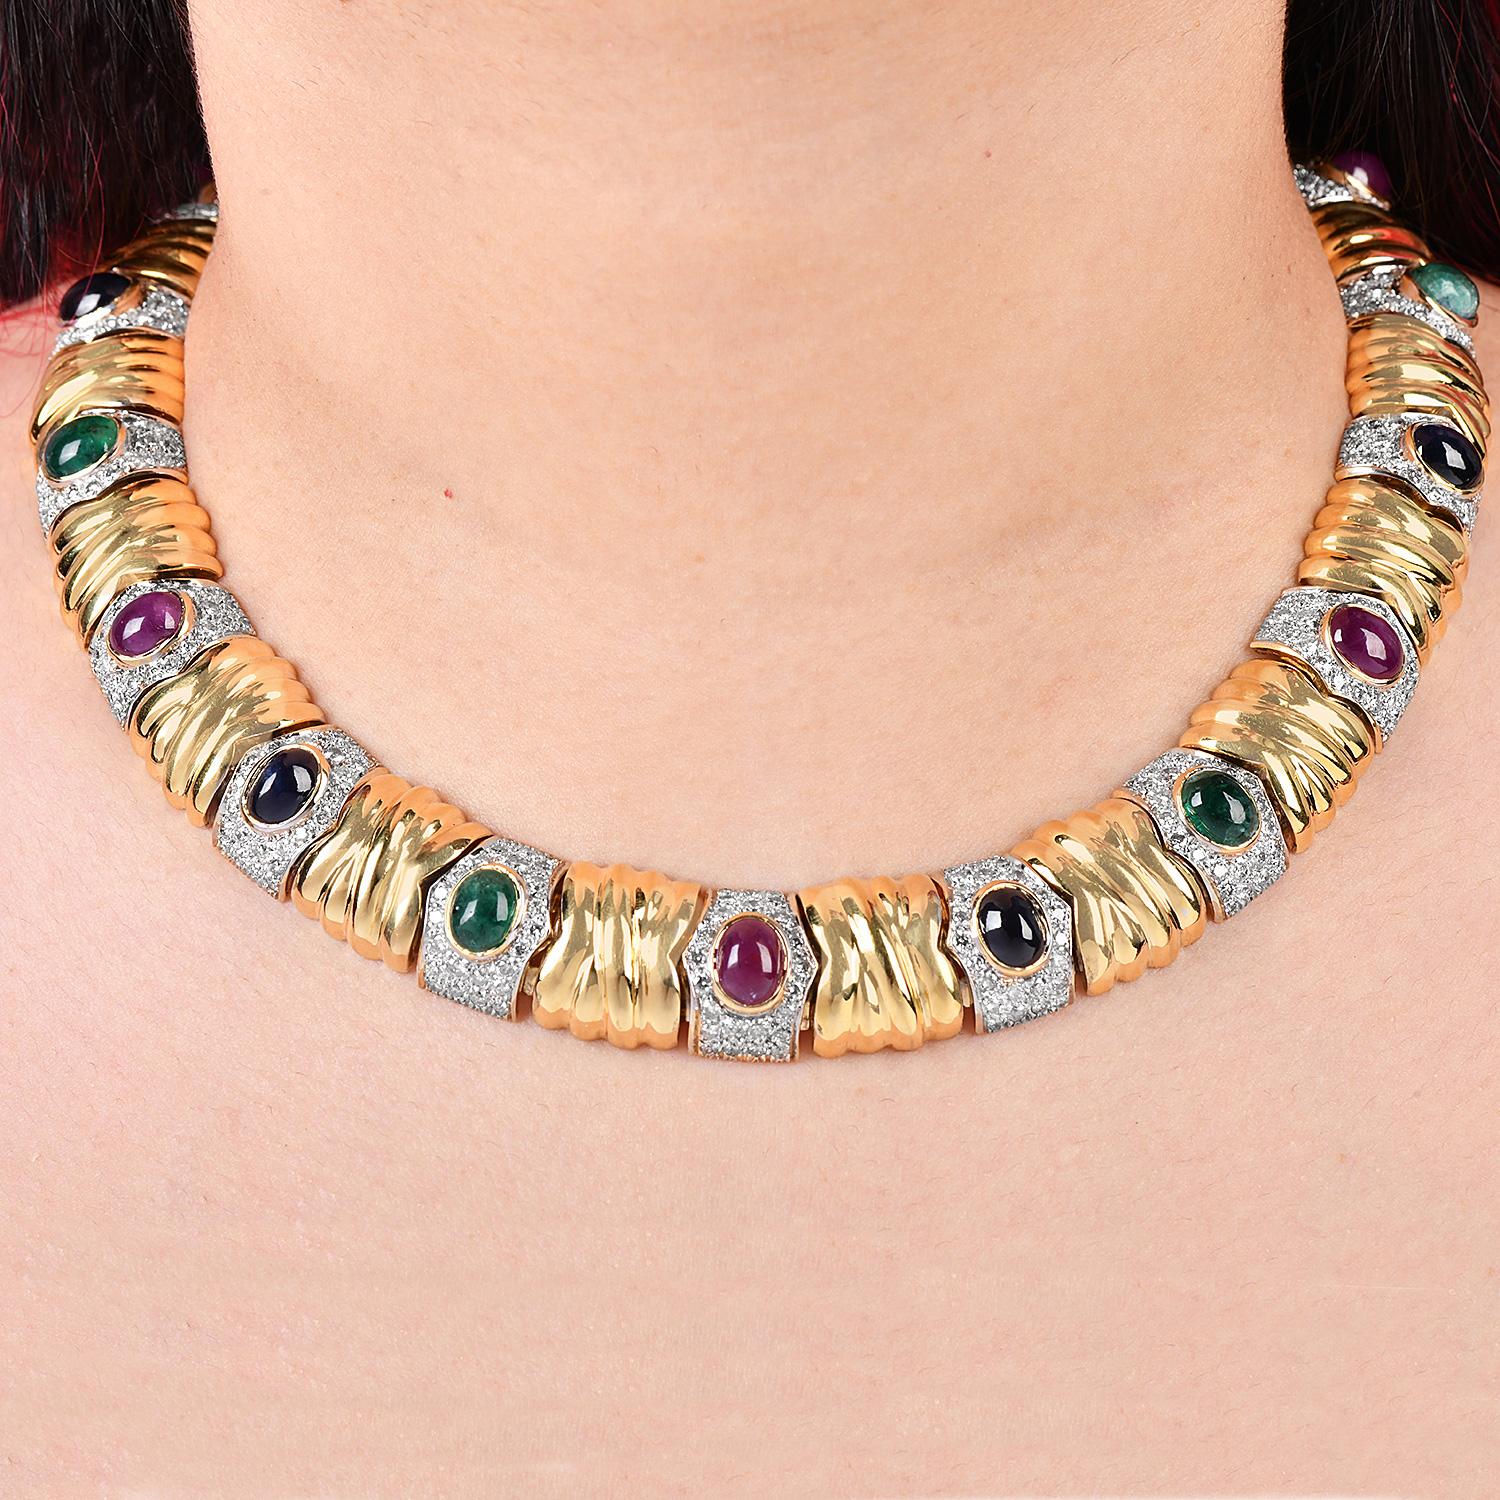 1980S Wide Diamond & Gemstone 18K Gold Choker Necklace  In Excellent Condition For Sale In Miami, FL